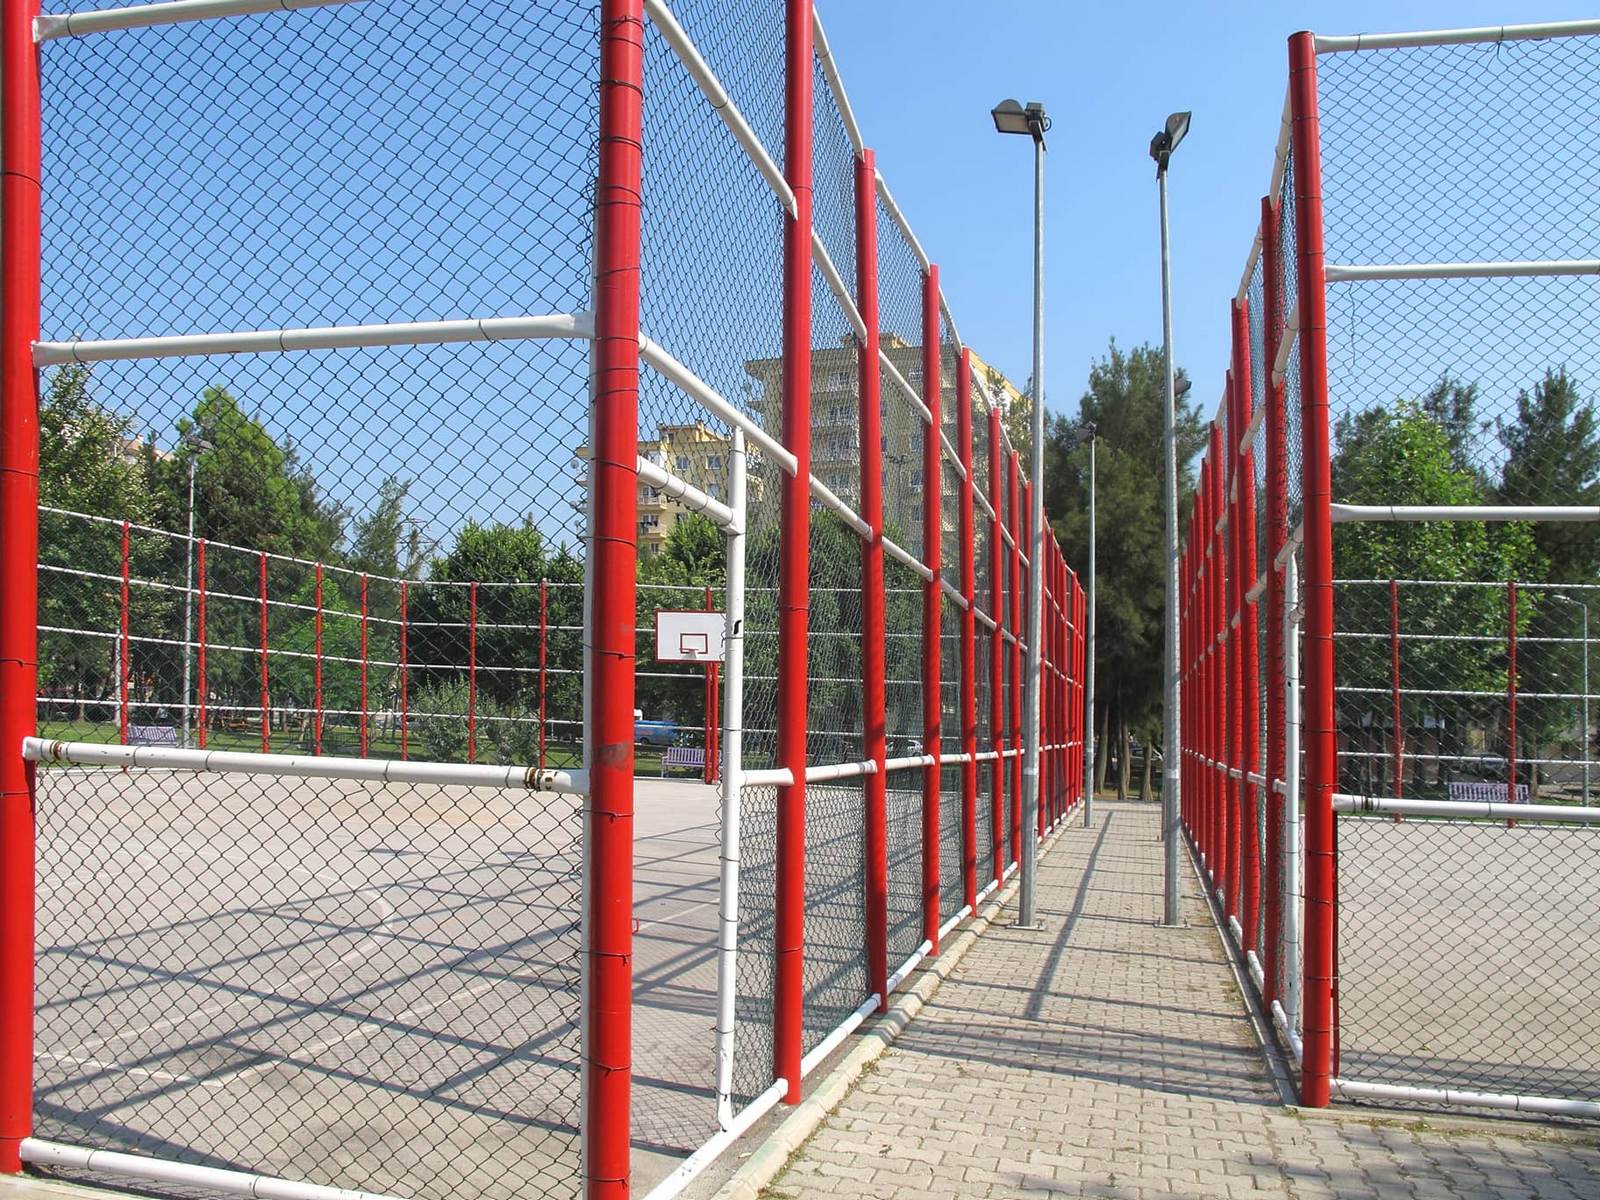 This image shows a professional chain link fence installed around basketball courts.